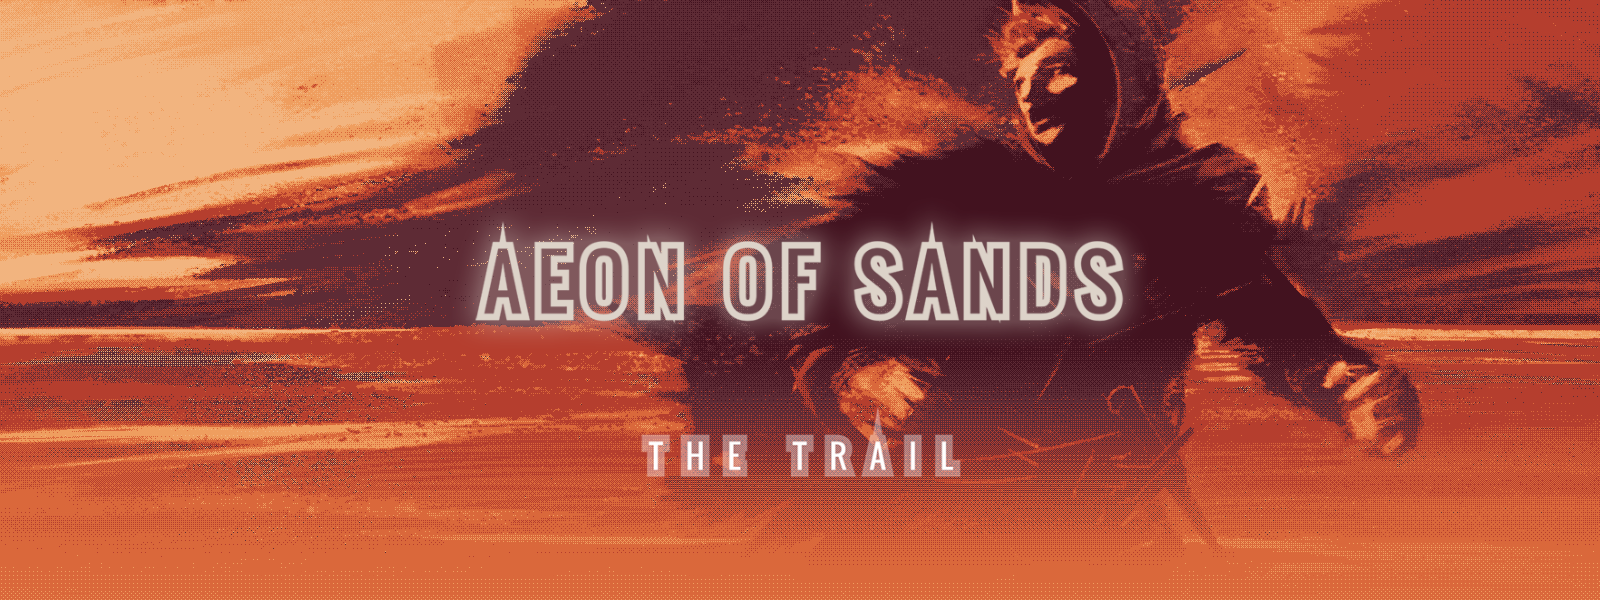 Aeon of Sands - The Trail - Demo